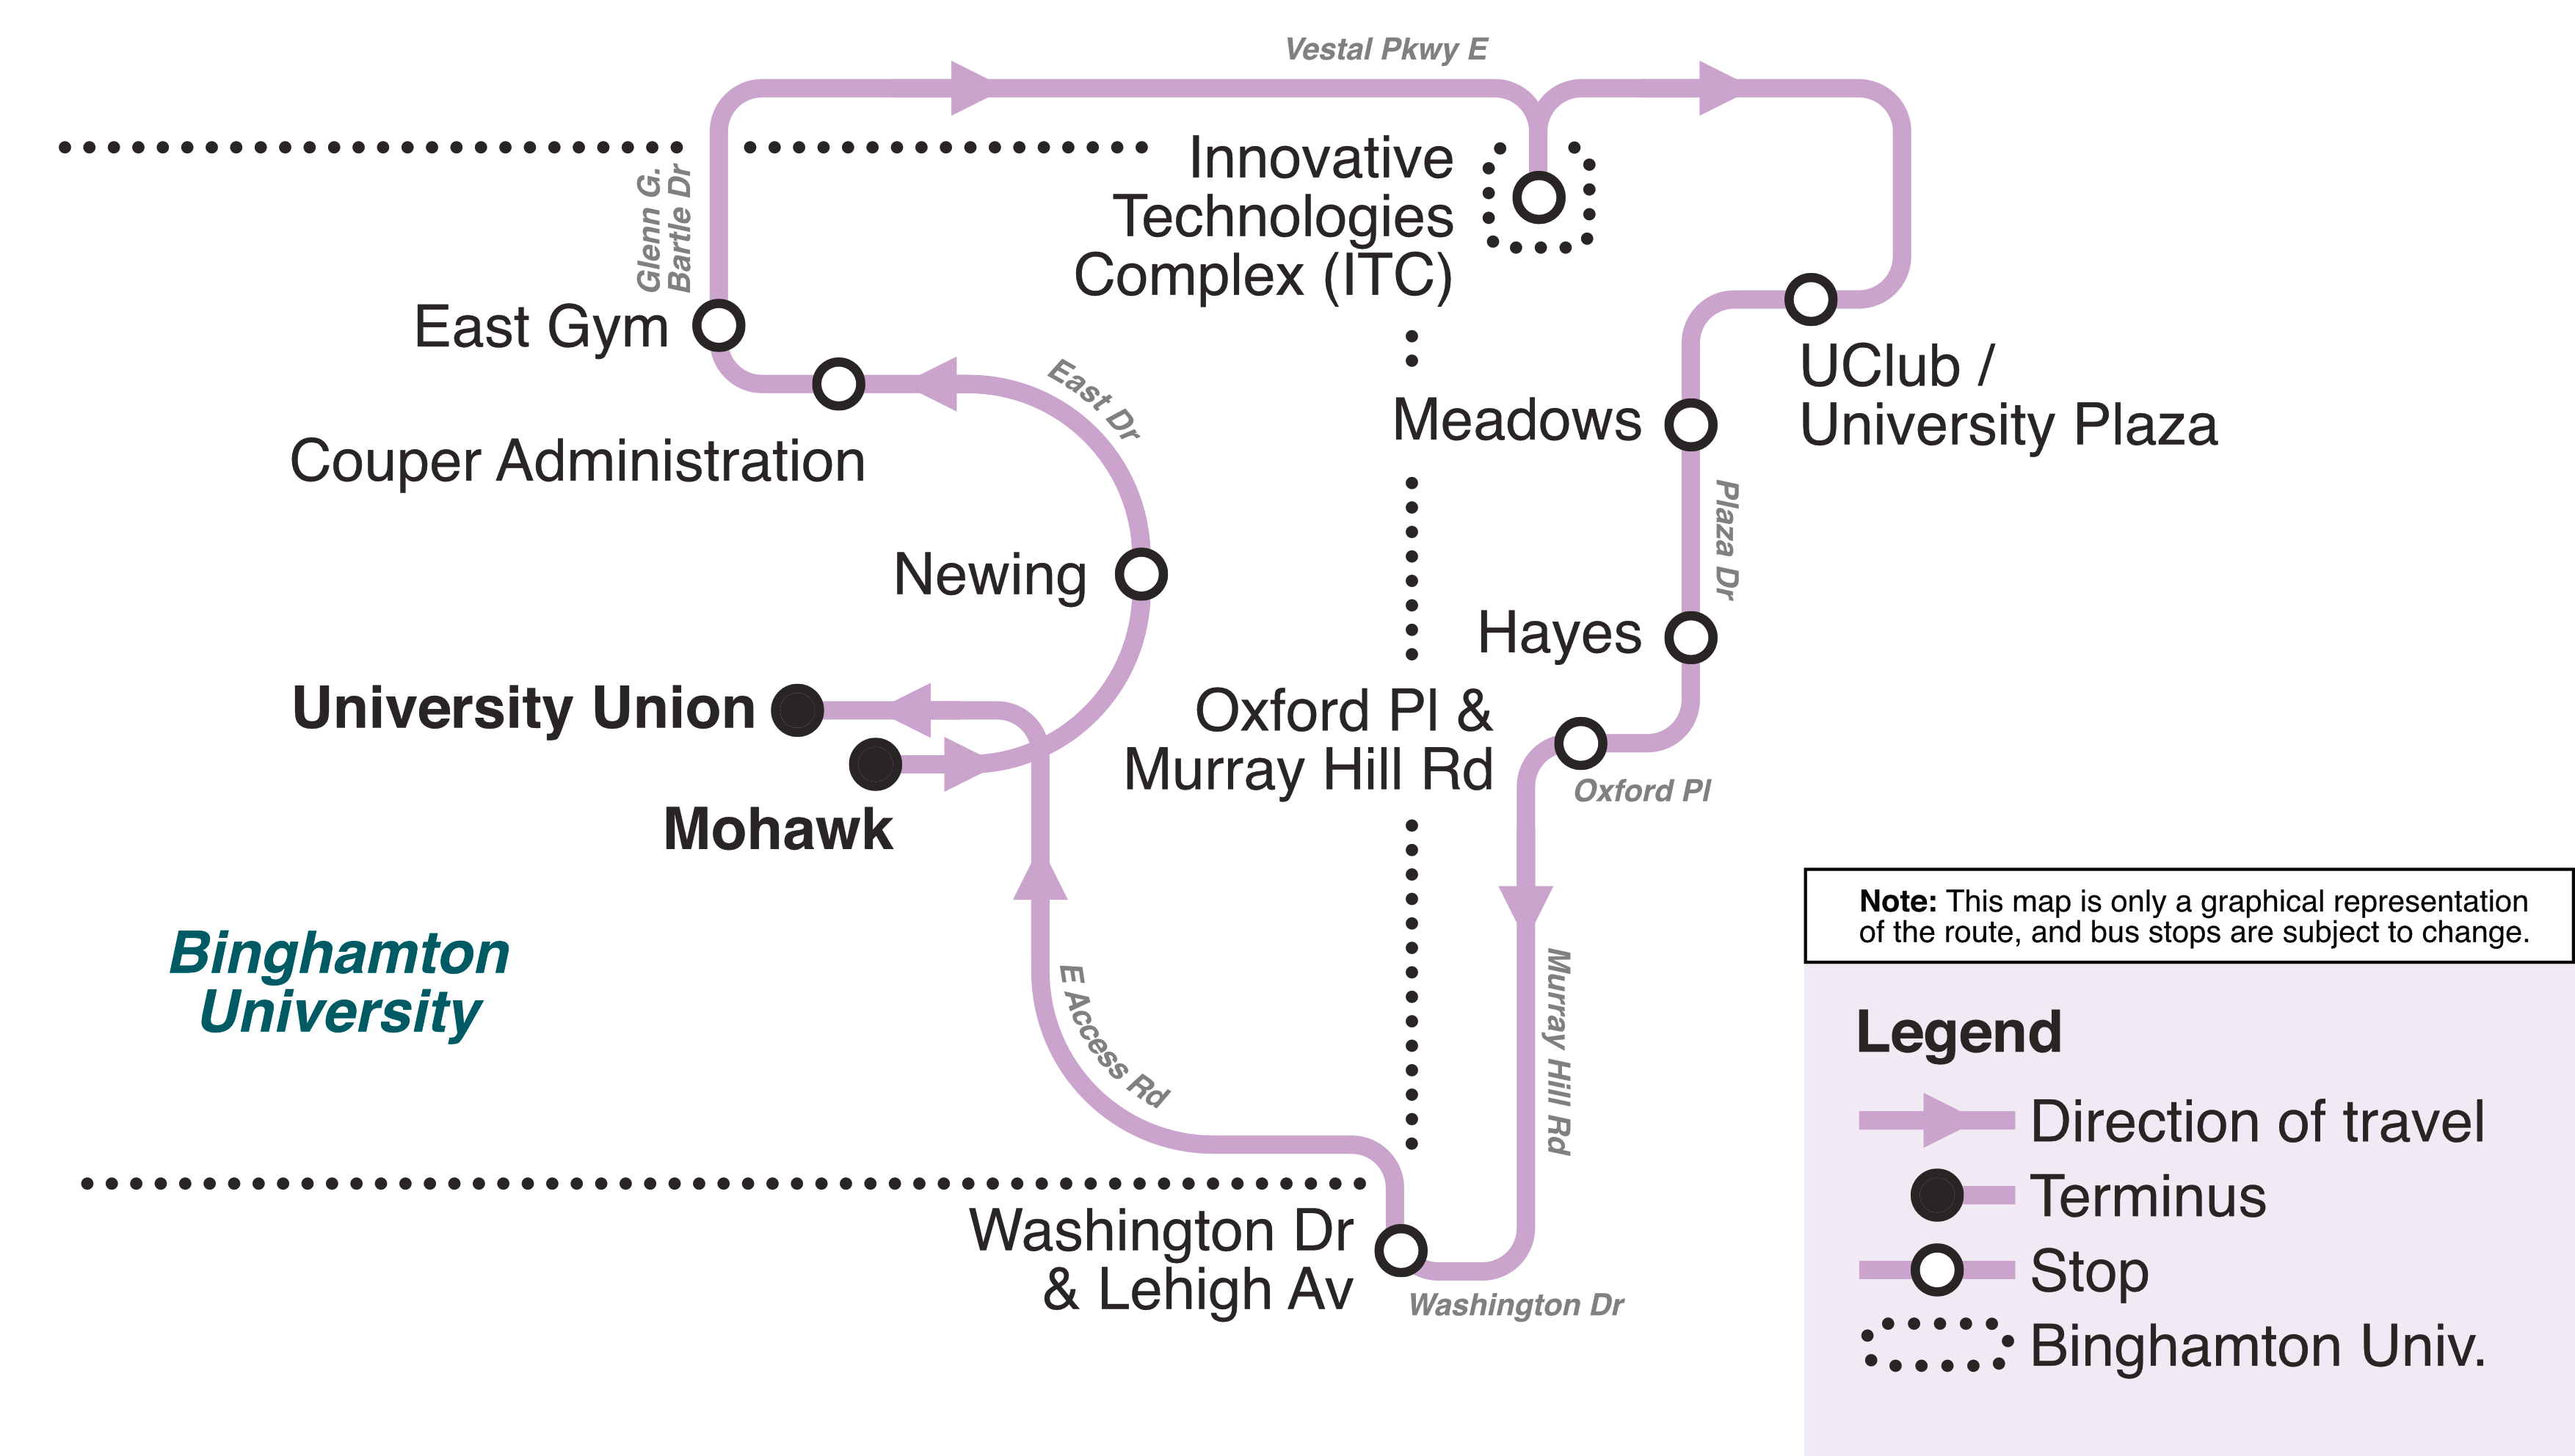 ITC-UClub Shuttle Route Map